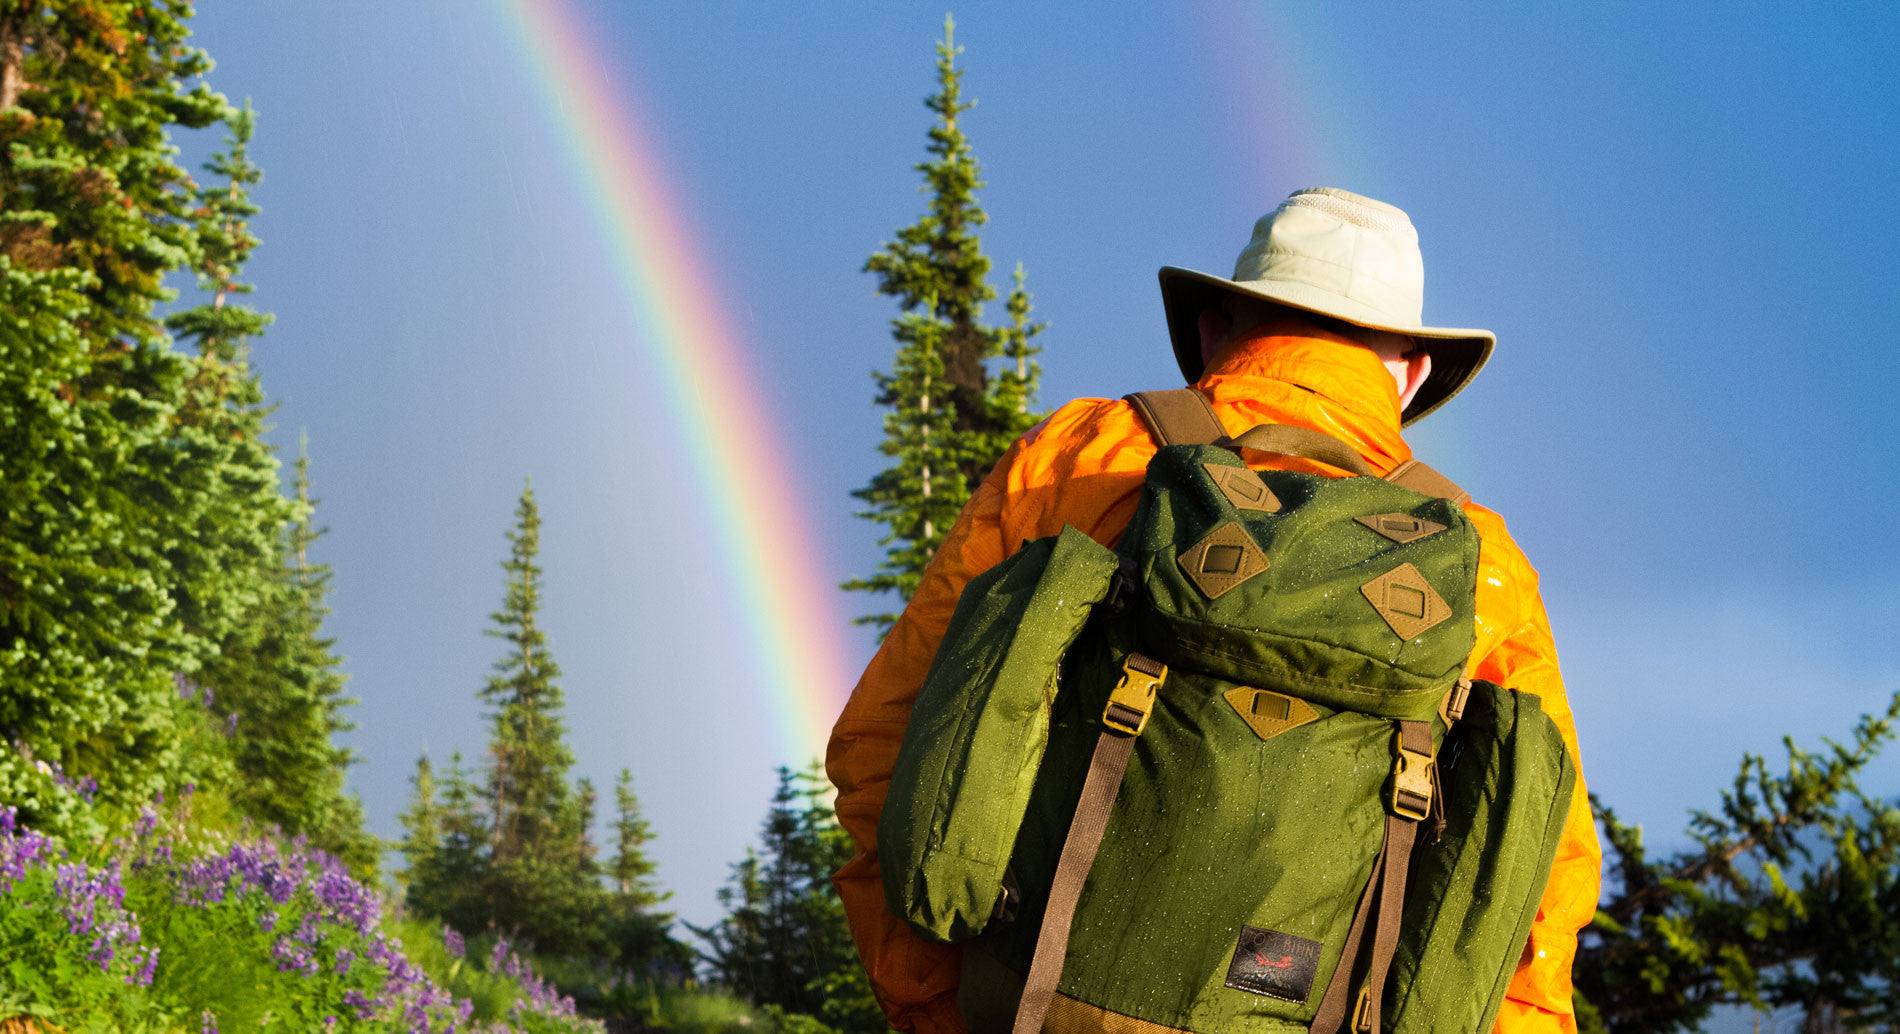 Tom hiking wearing a Guide's Pack and there is a rainbow!